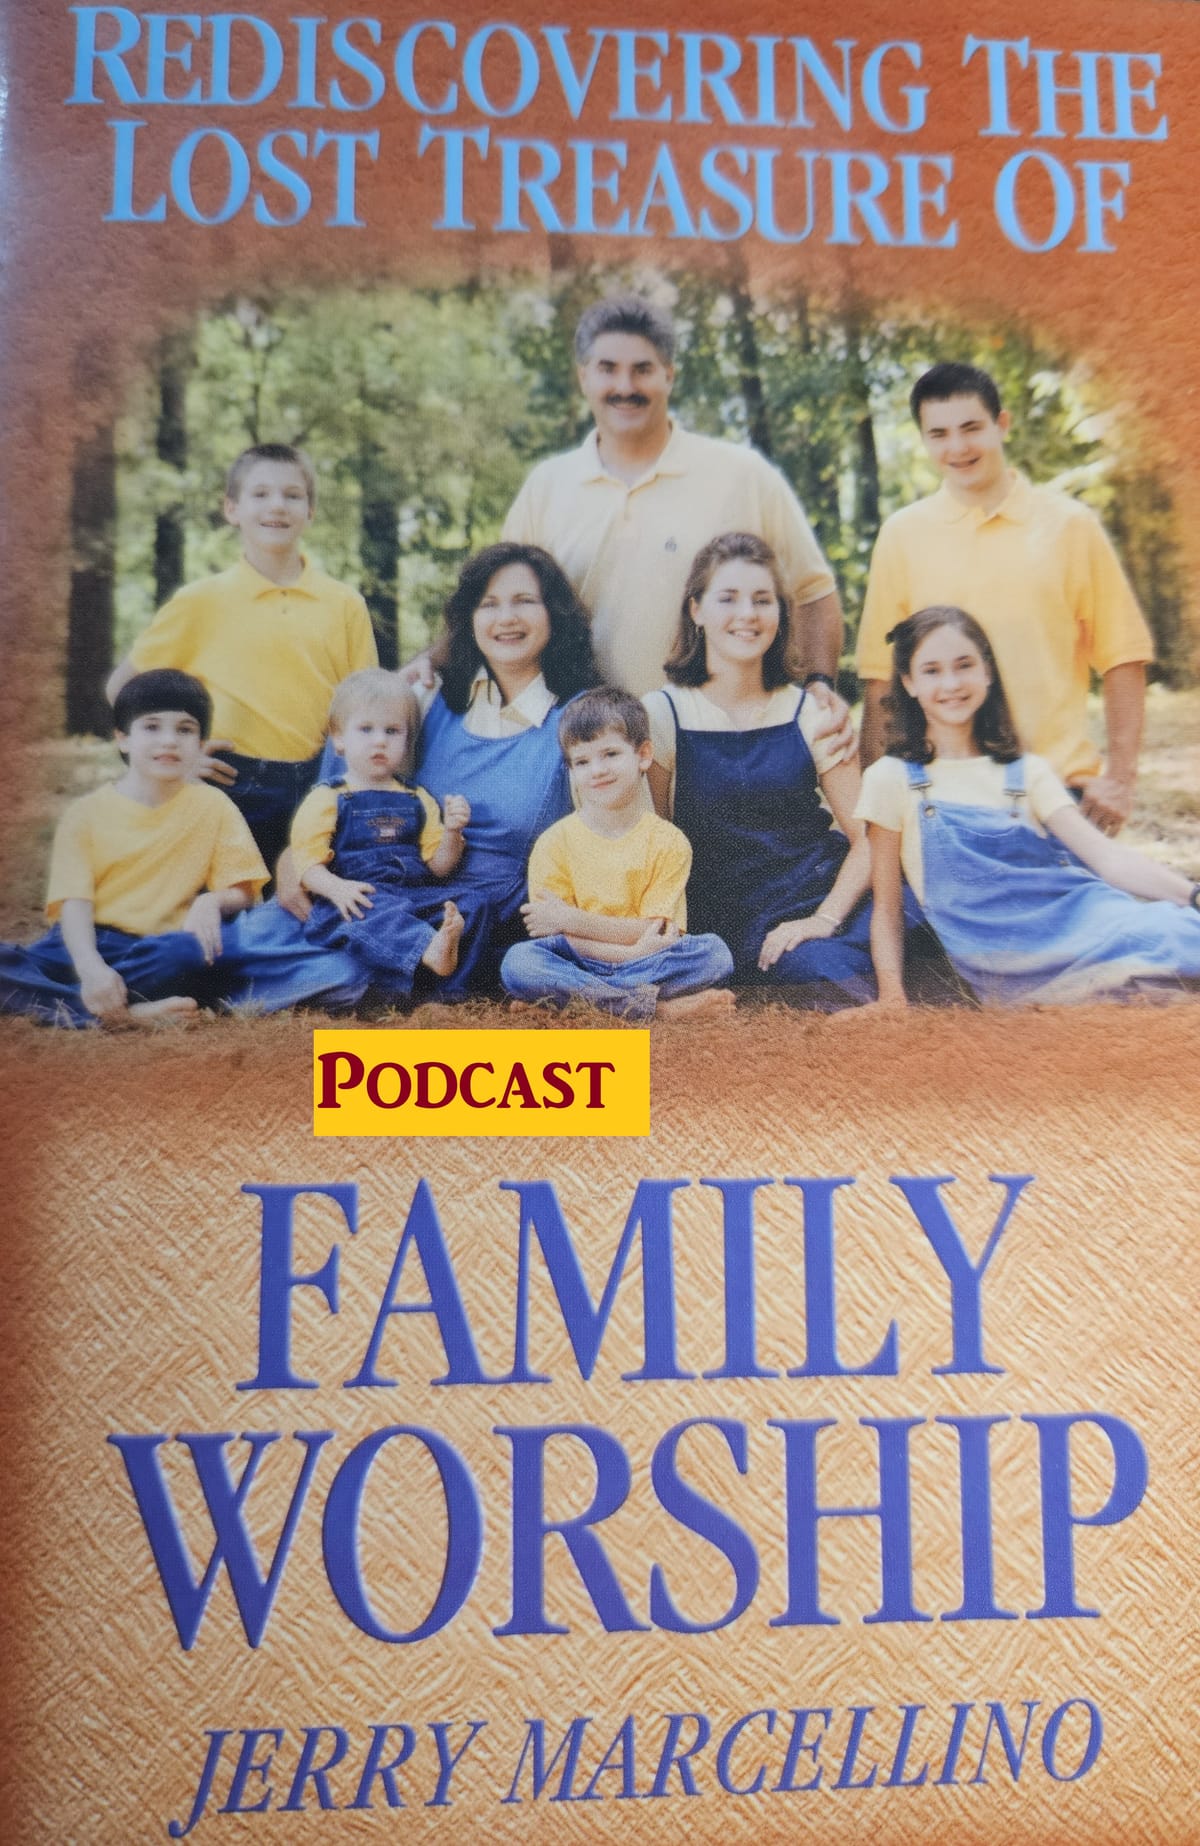 Resource Spotlight: Jerry Marcellino, Rediscovering The Treasure of Family Worship (Podcast) Updated link